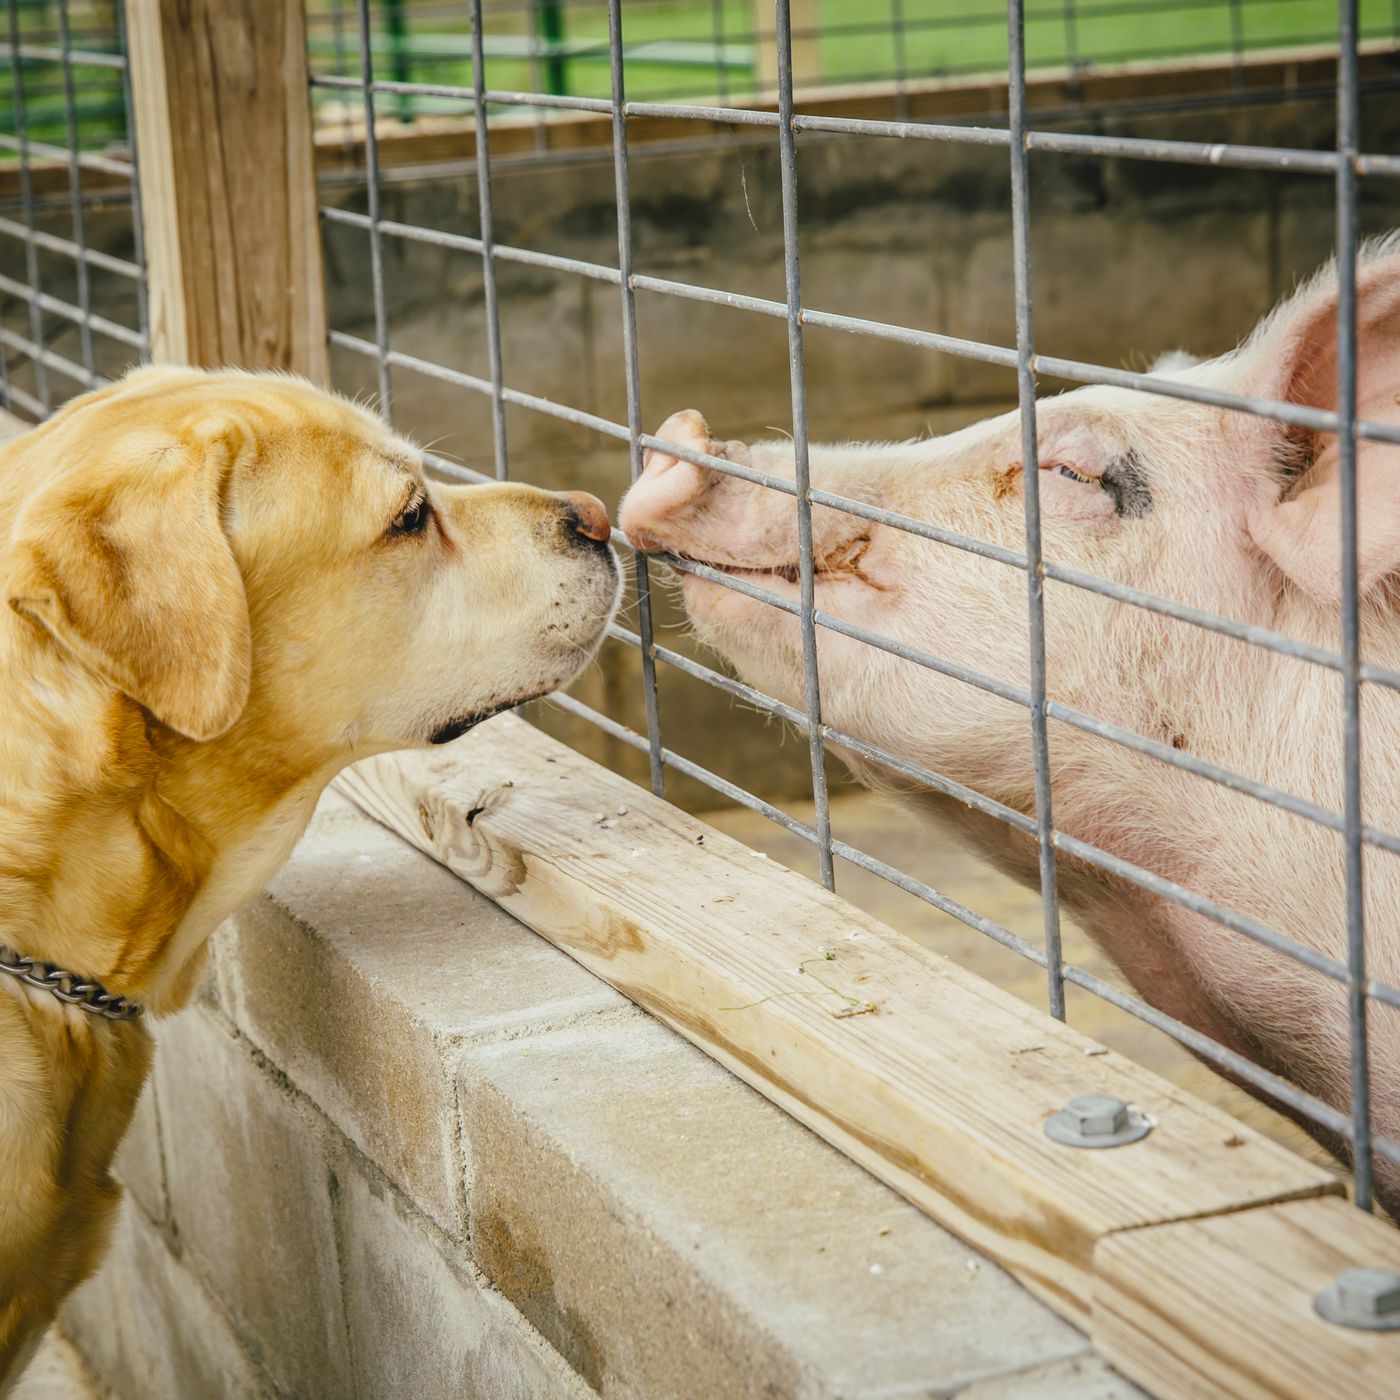 Pigs are as smart as dogs, so why do we eat one and love the other? - Vox